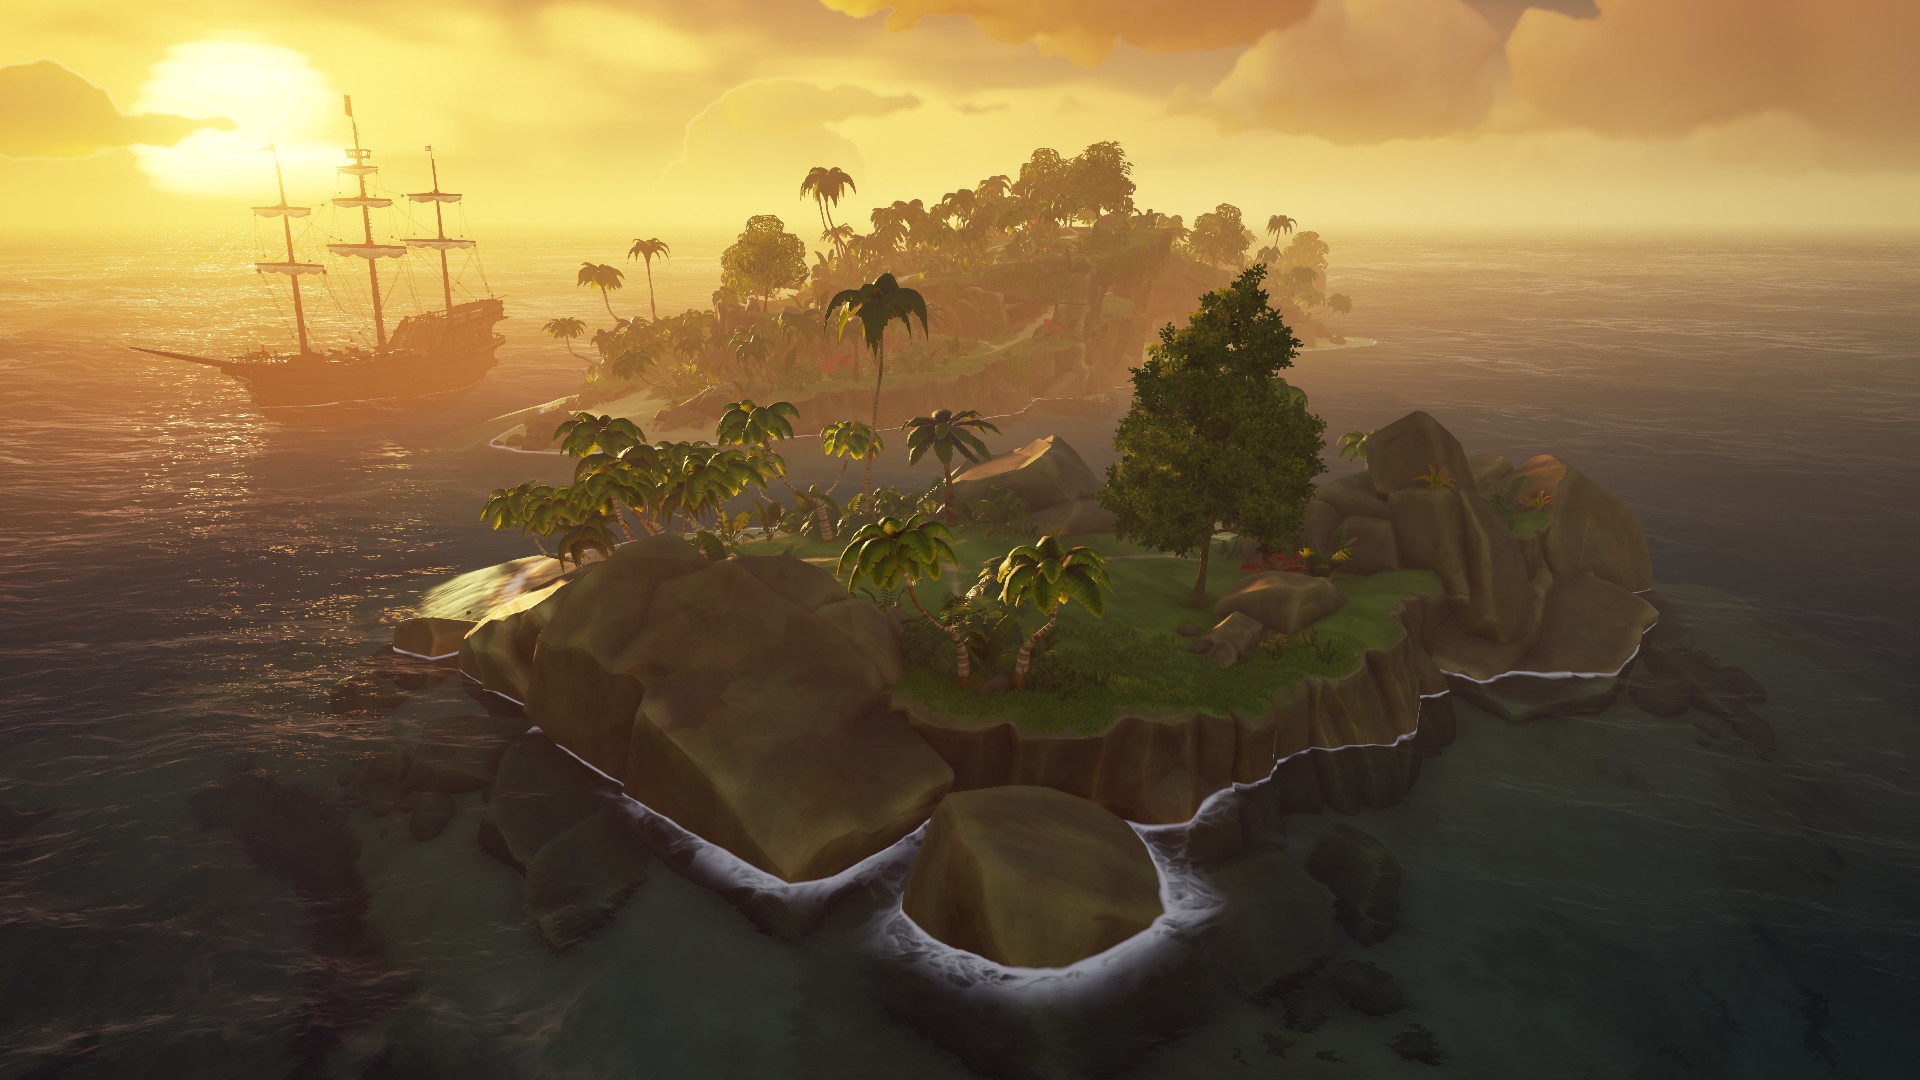 Sea of Thieves Free Download